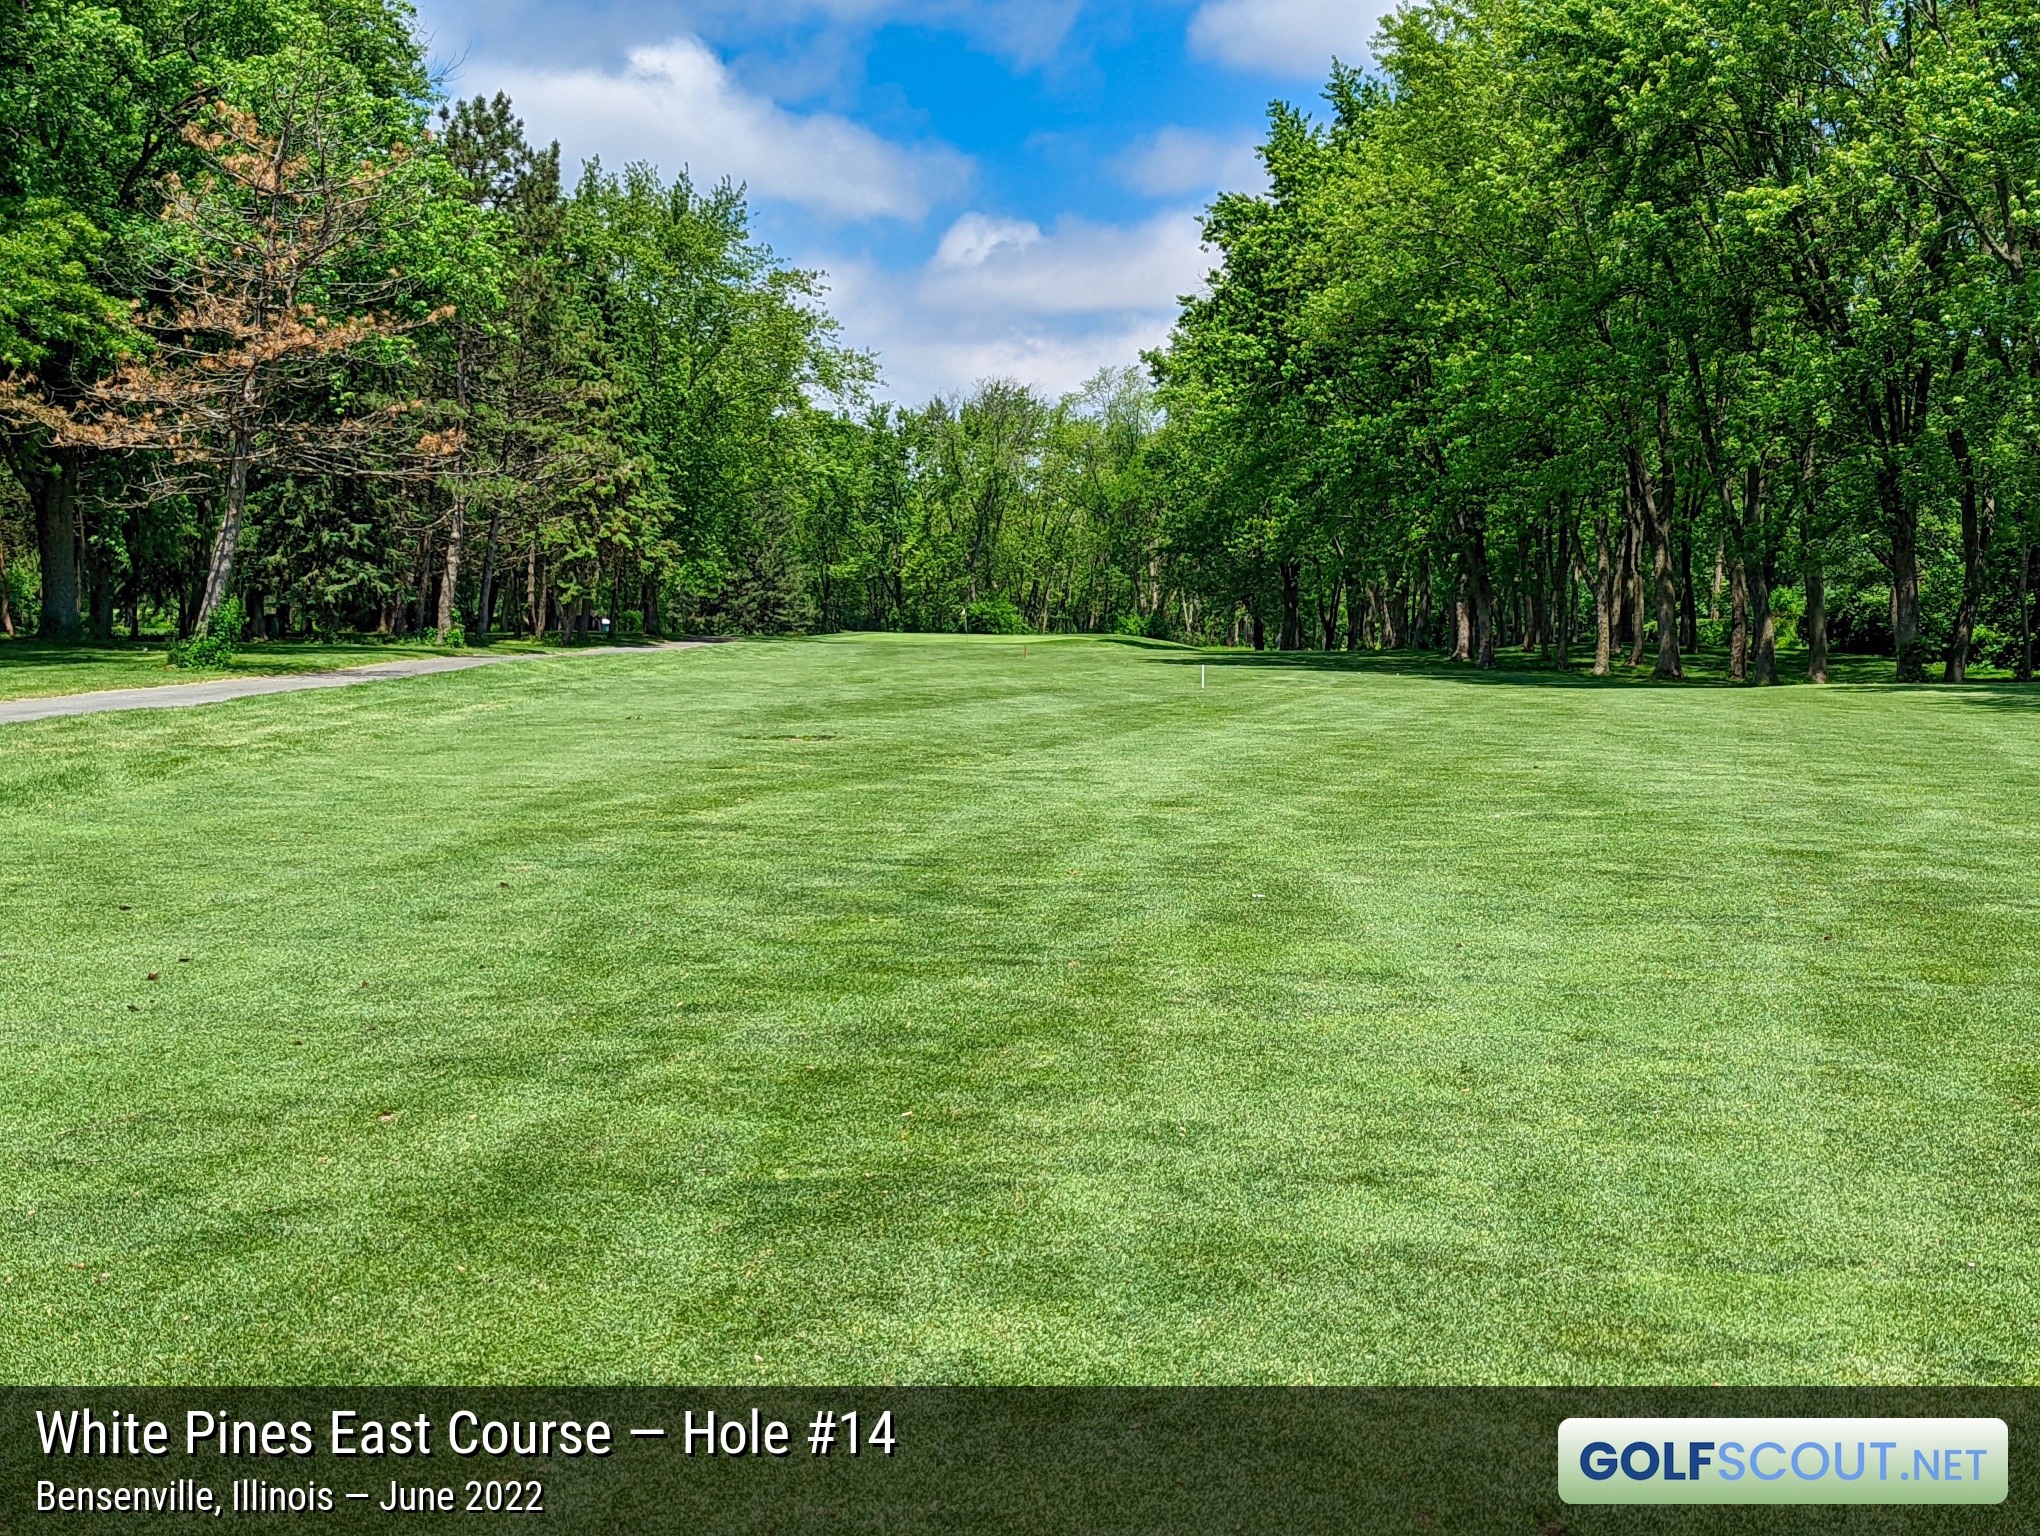 Photo of hole #14 at White Pines East Course in Bensenville, Illinois. 